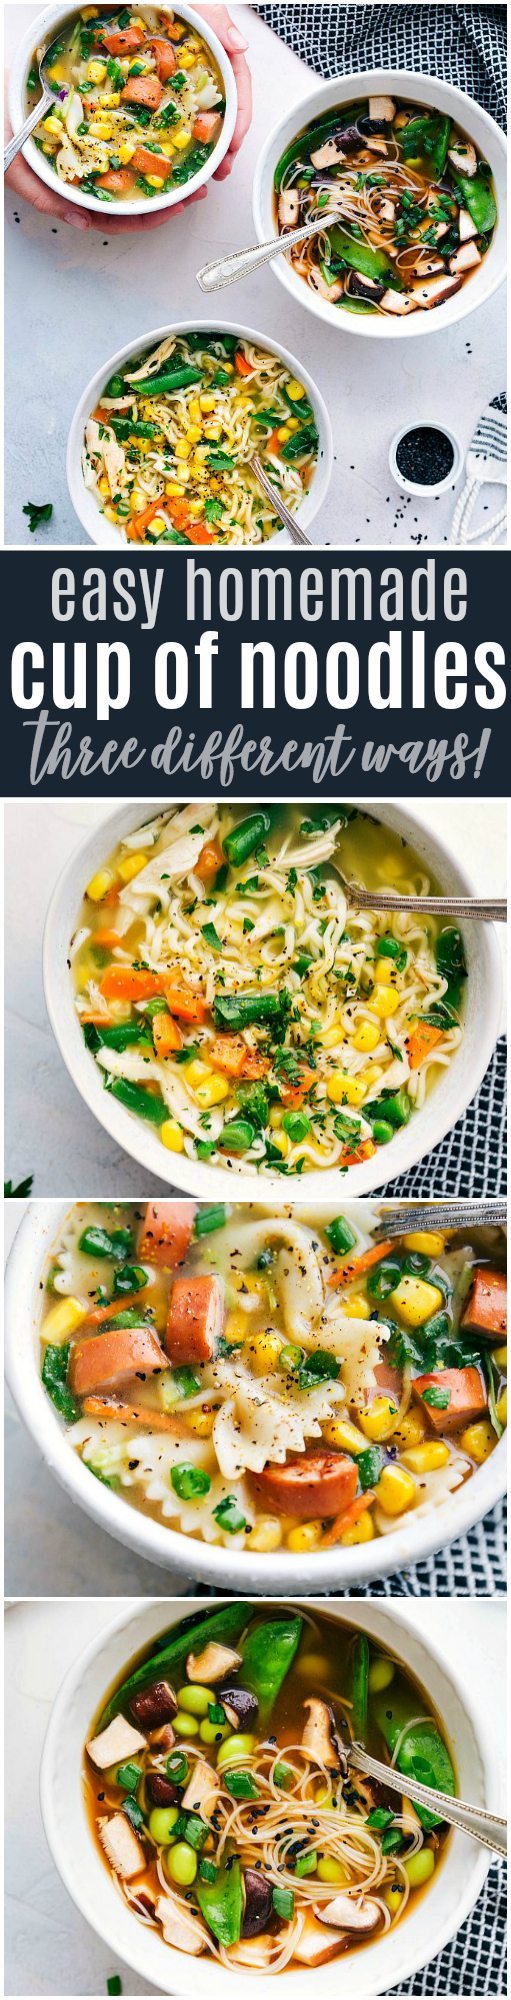 Easy and healthy homemade CUP OF NOODLES: three different ways! Recipe via chelseasmessyapron.com | #cupofnoodles #homemade #easy #quick #edamame #chicken #noodle #soups #soup #healthy #heart #kidfriendly